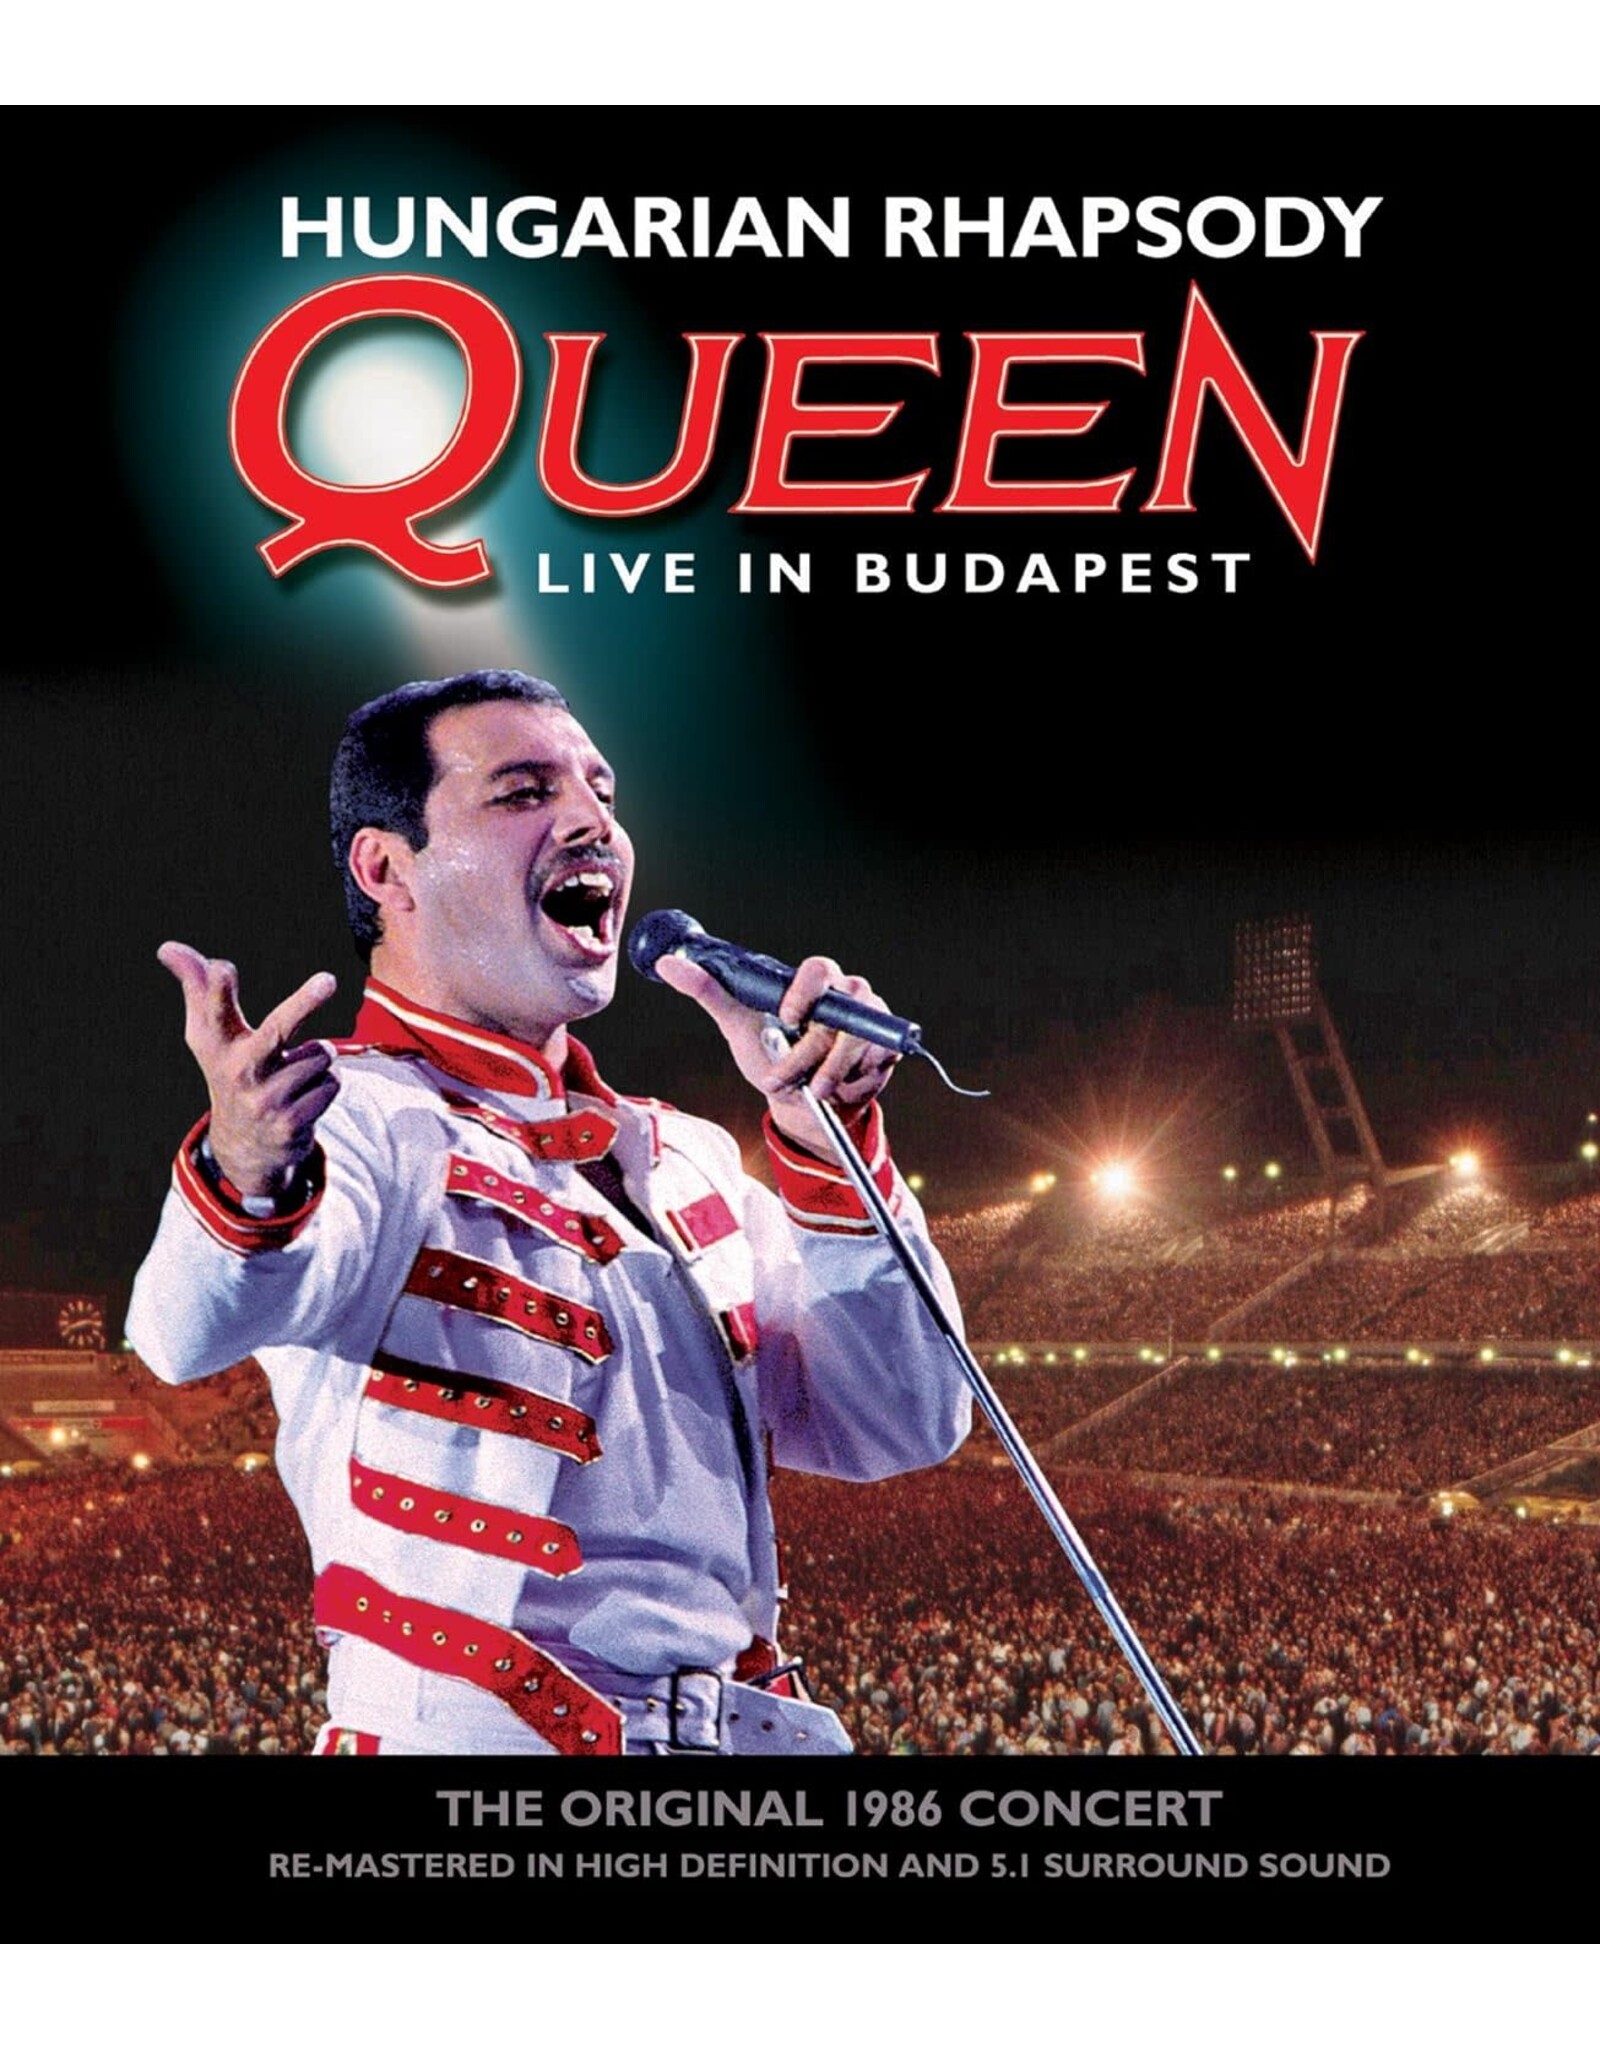 Cult & Cool Queen Hungarian Rhapsody Live in Budapest (Used)